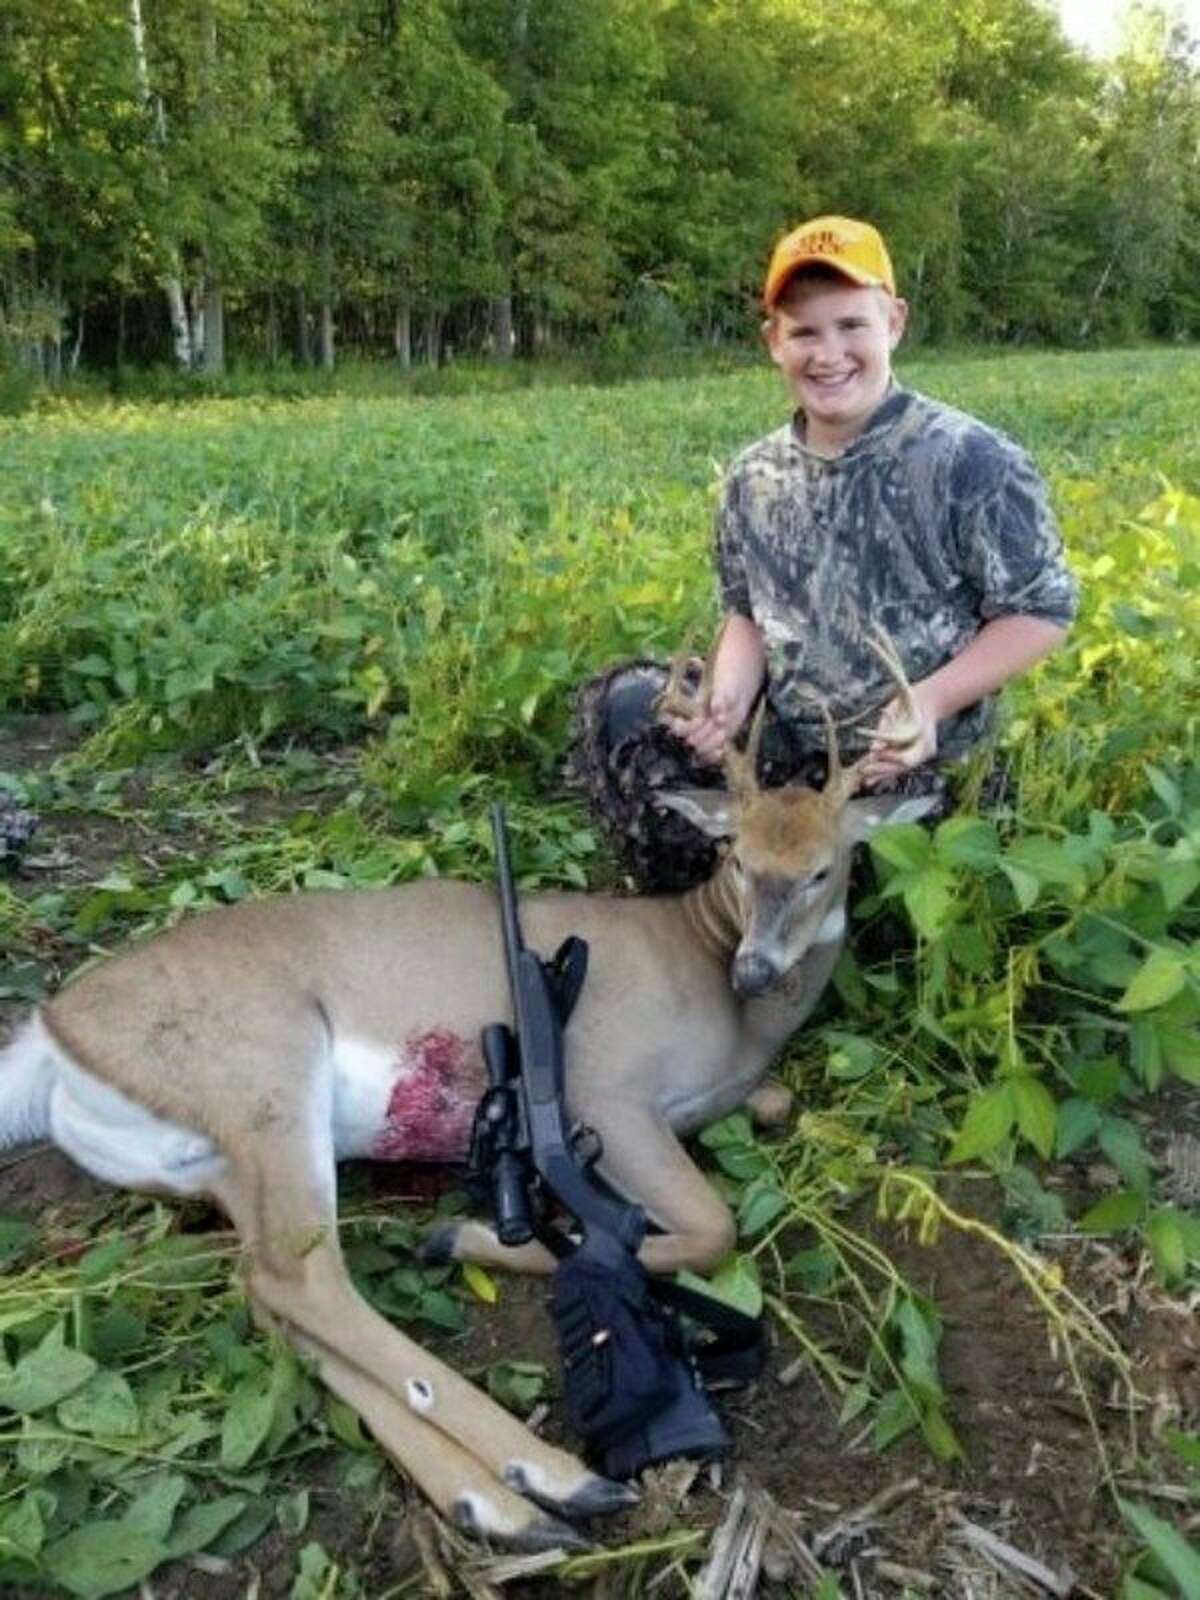 Noah Braun, 14, poses for a photo with a 9-point buck he recently shot. (Brian Braun/Courtesy Photo)